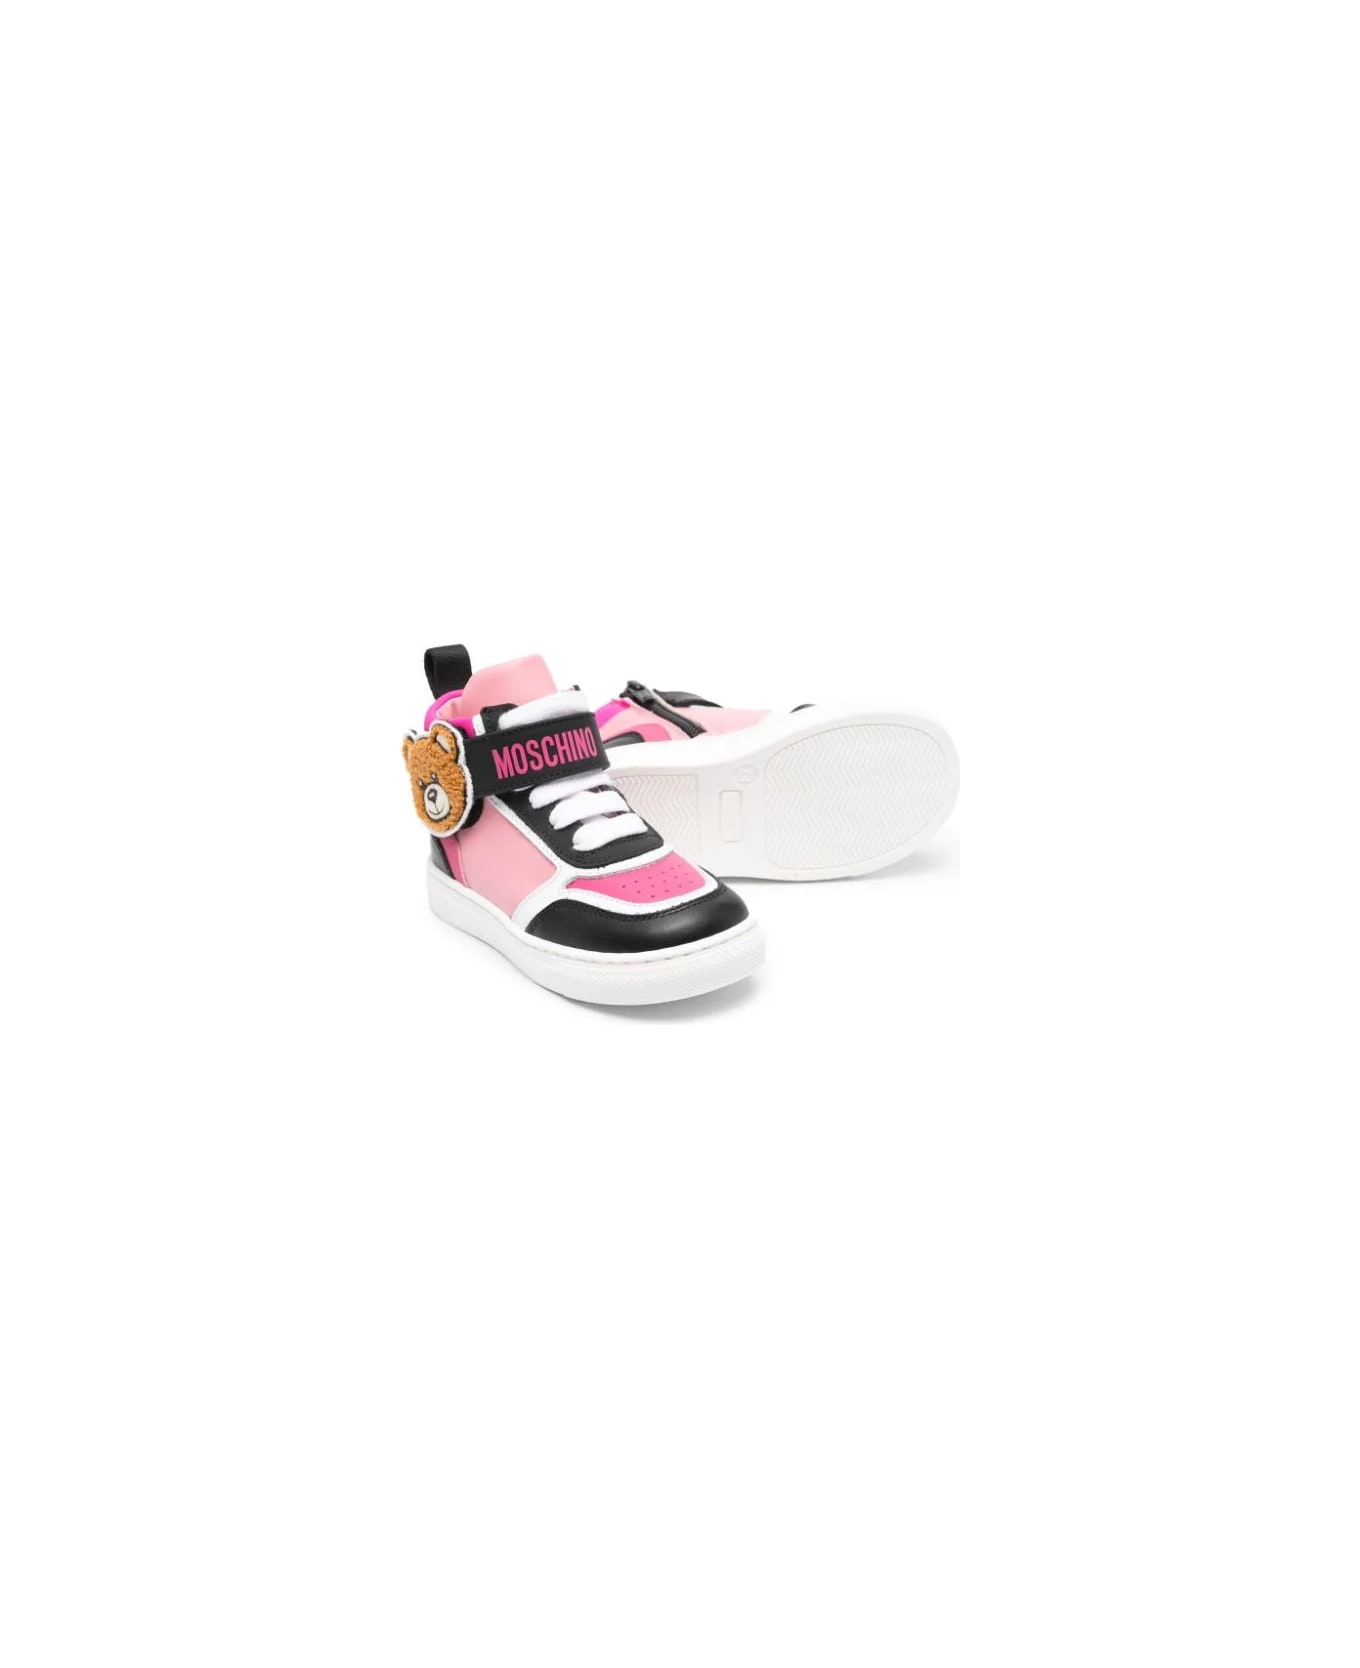 Moschino Sneakers Alte - Pink シューズ